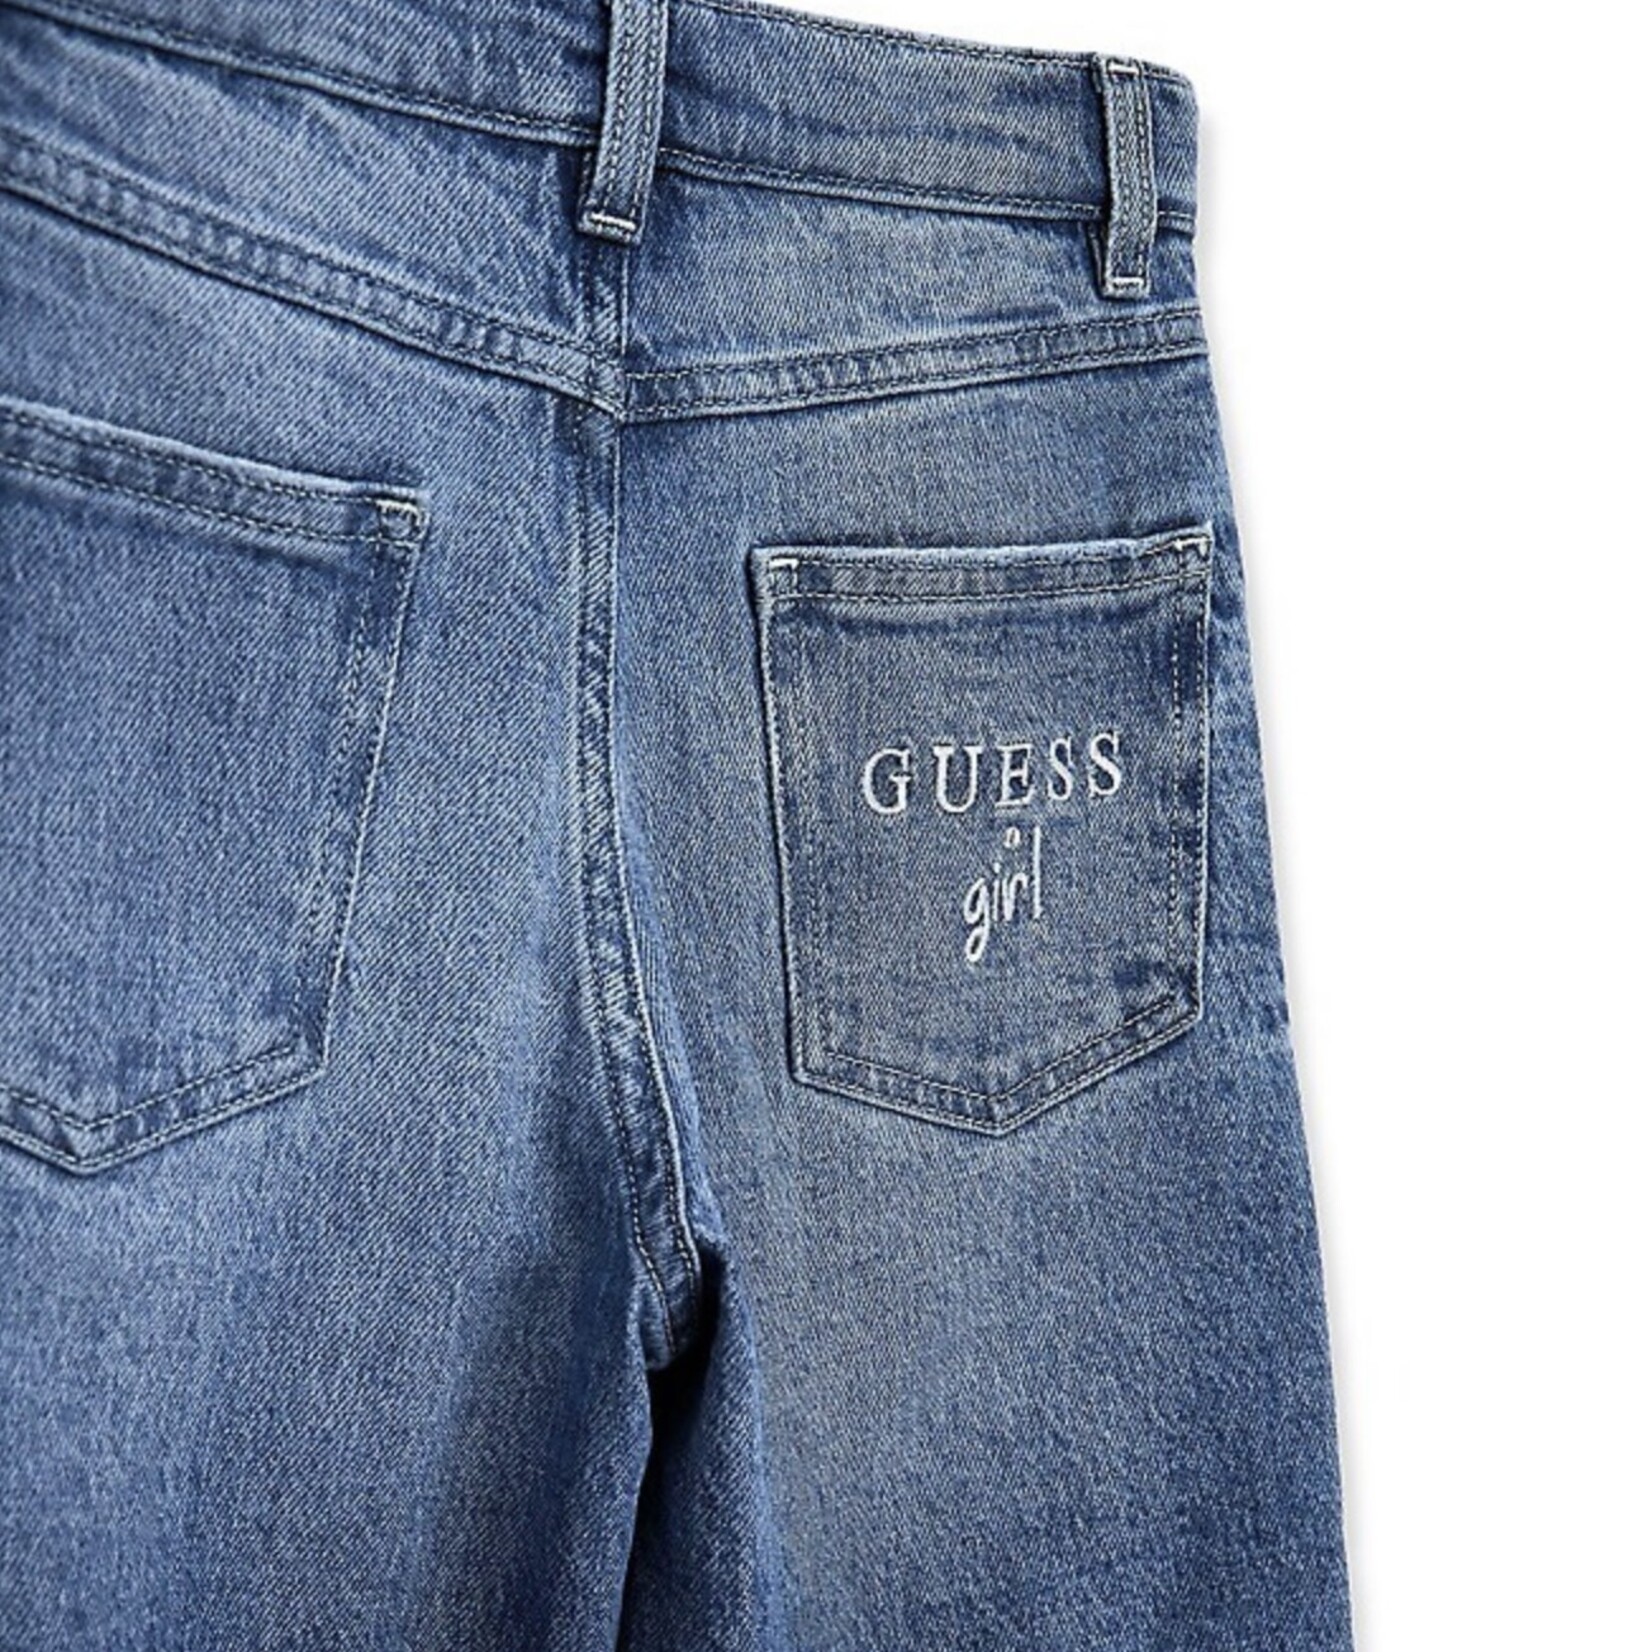 Guess Guess - 90's Denim With Splits